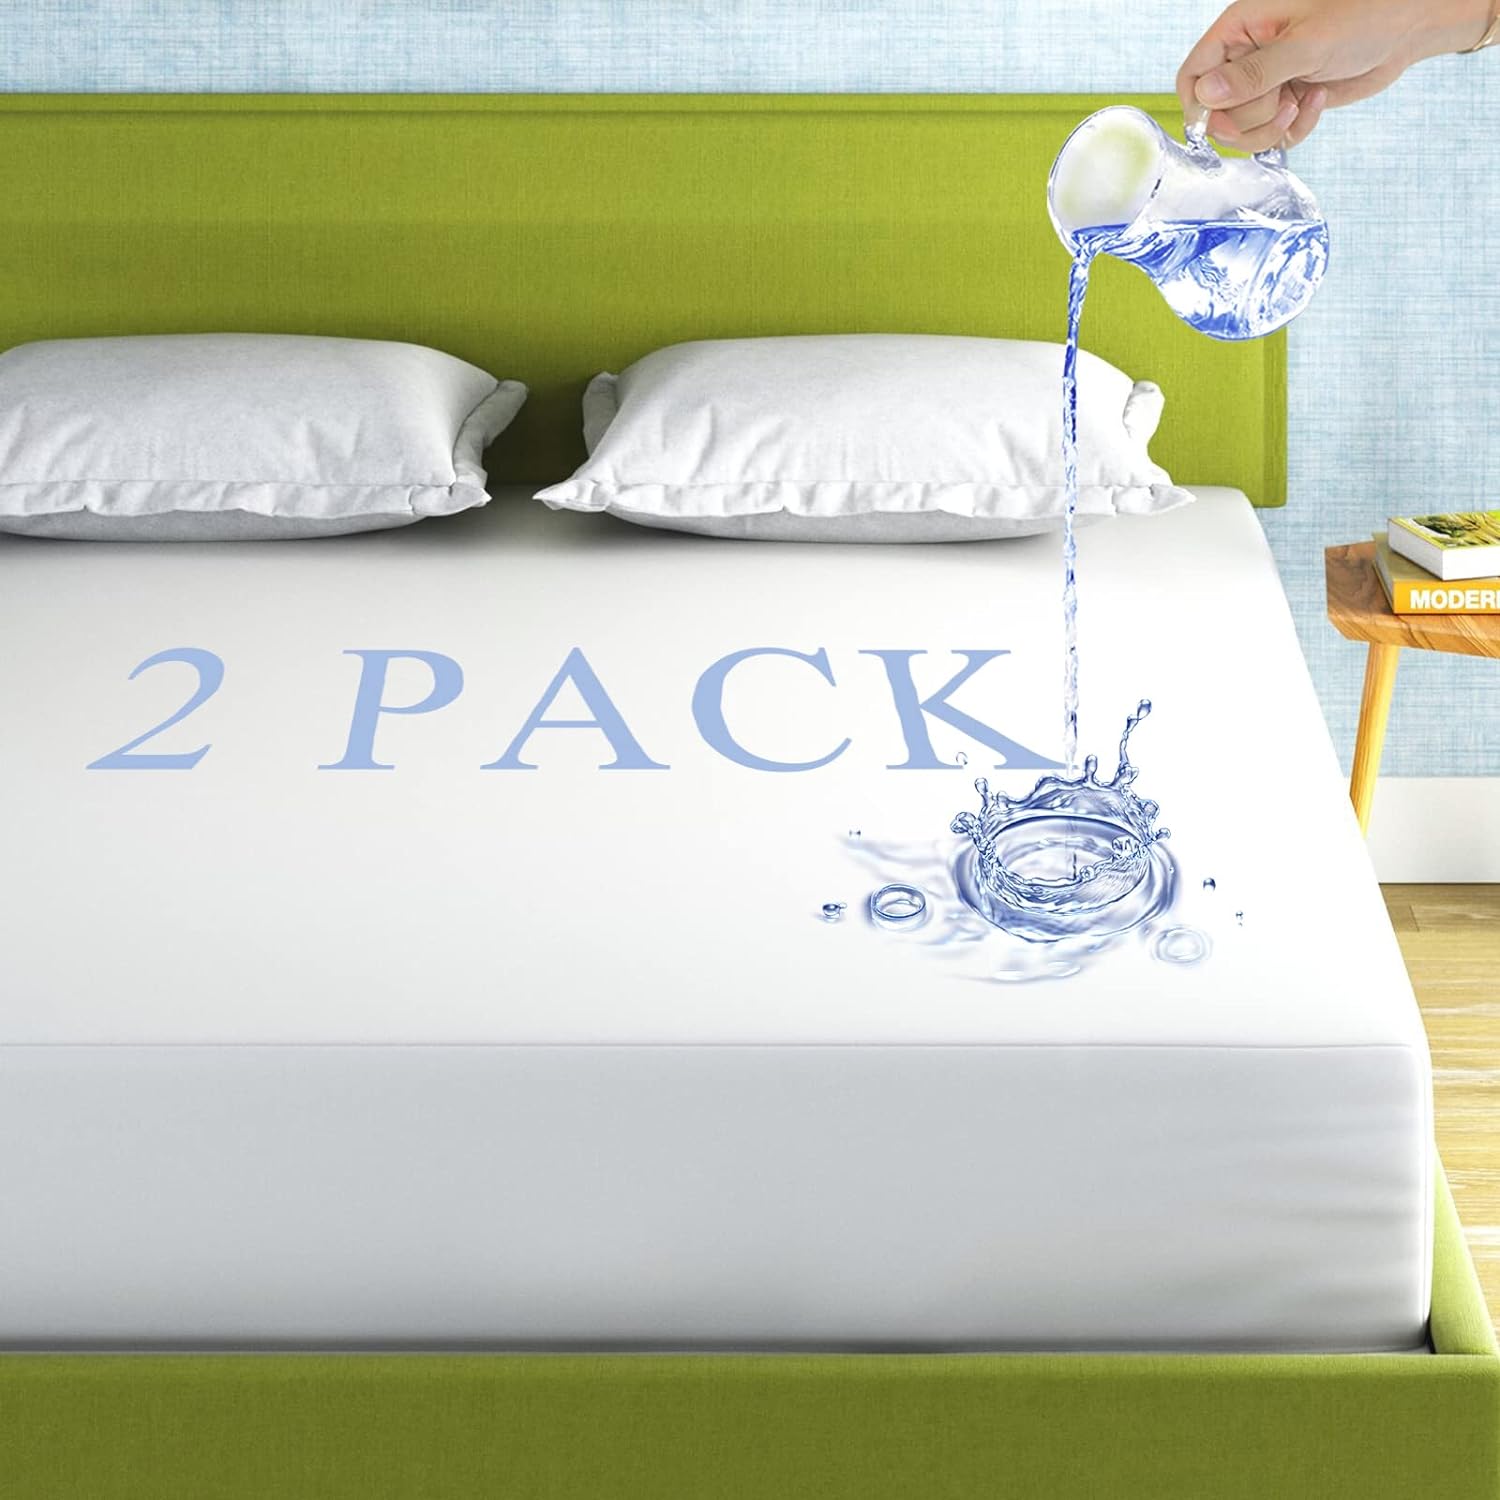 2 Pack Mattress Protector Twin Size 100% Waterproof Fitted Mattress Cover, Breathable Noiseless & Machine Washable Bed Cover Deep Pocket from 5" to 21", Bed Protector for Pets Kids Adults - Vinyl Free